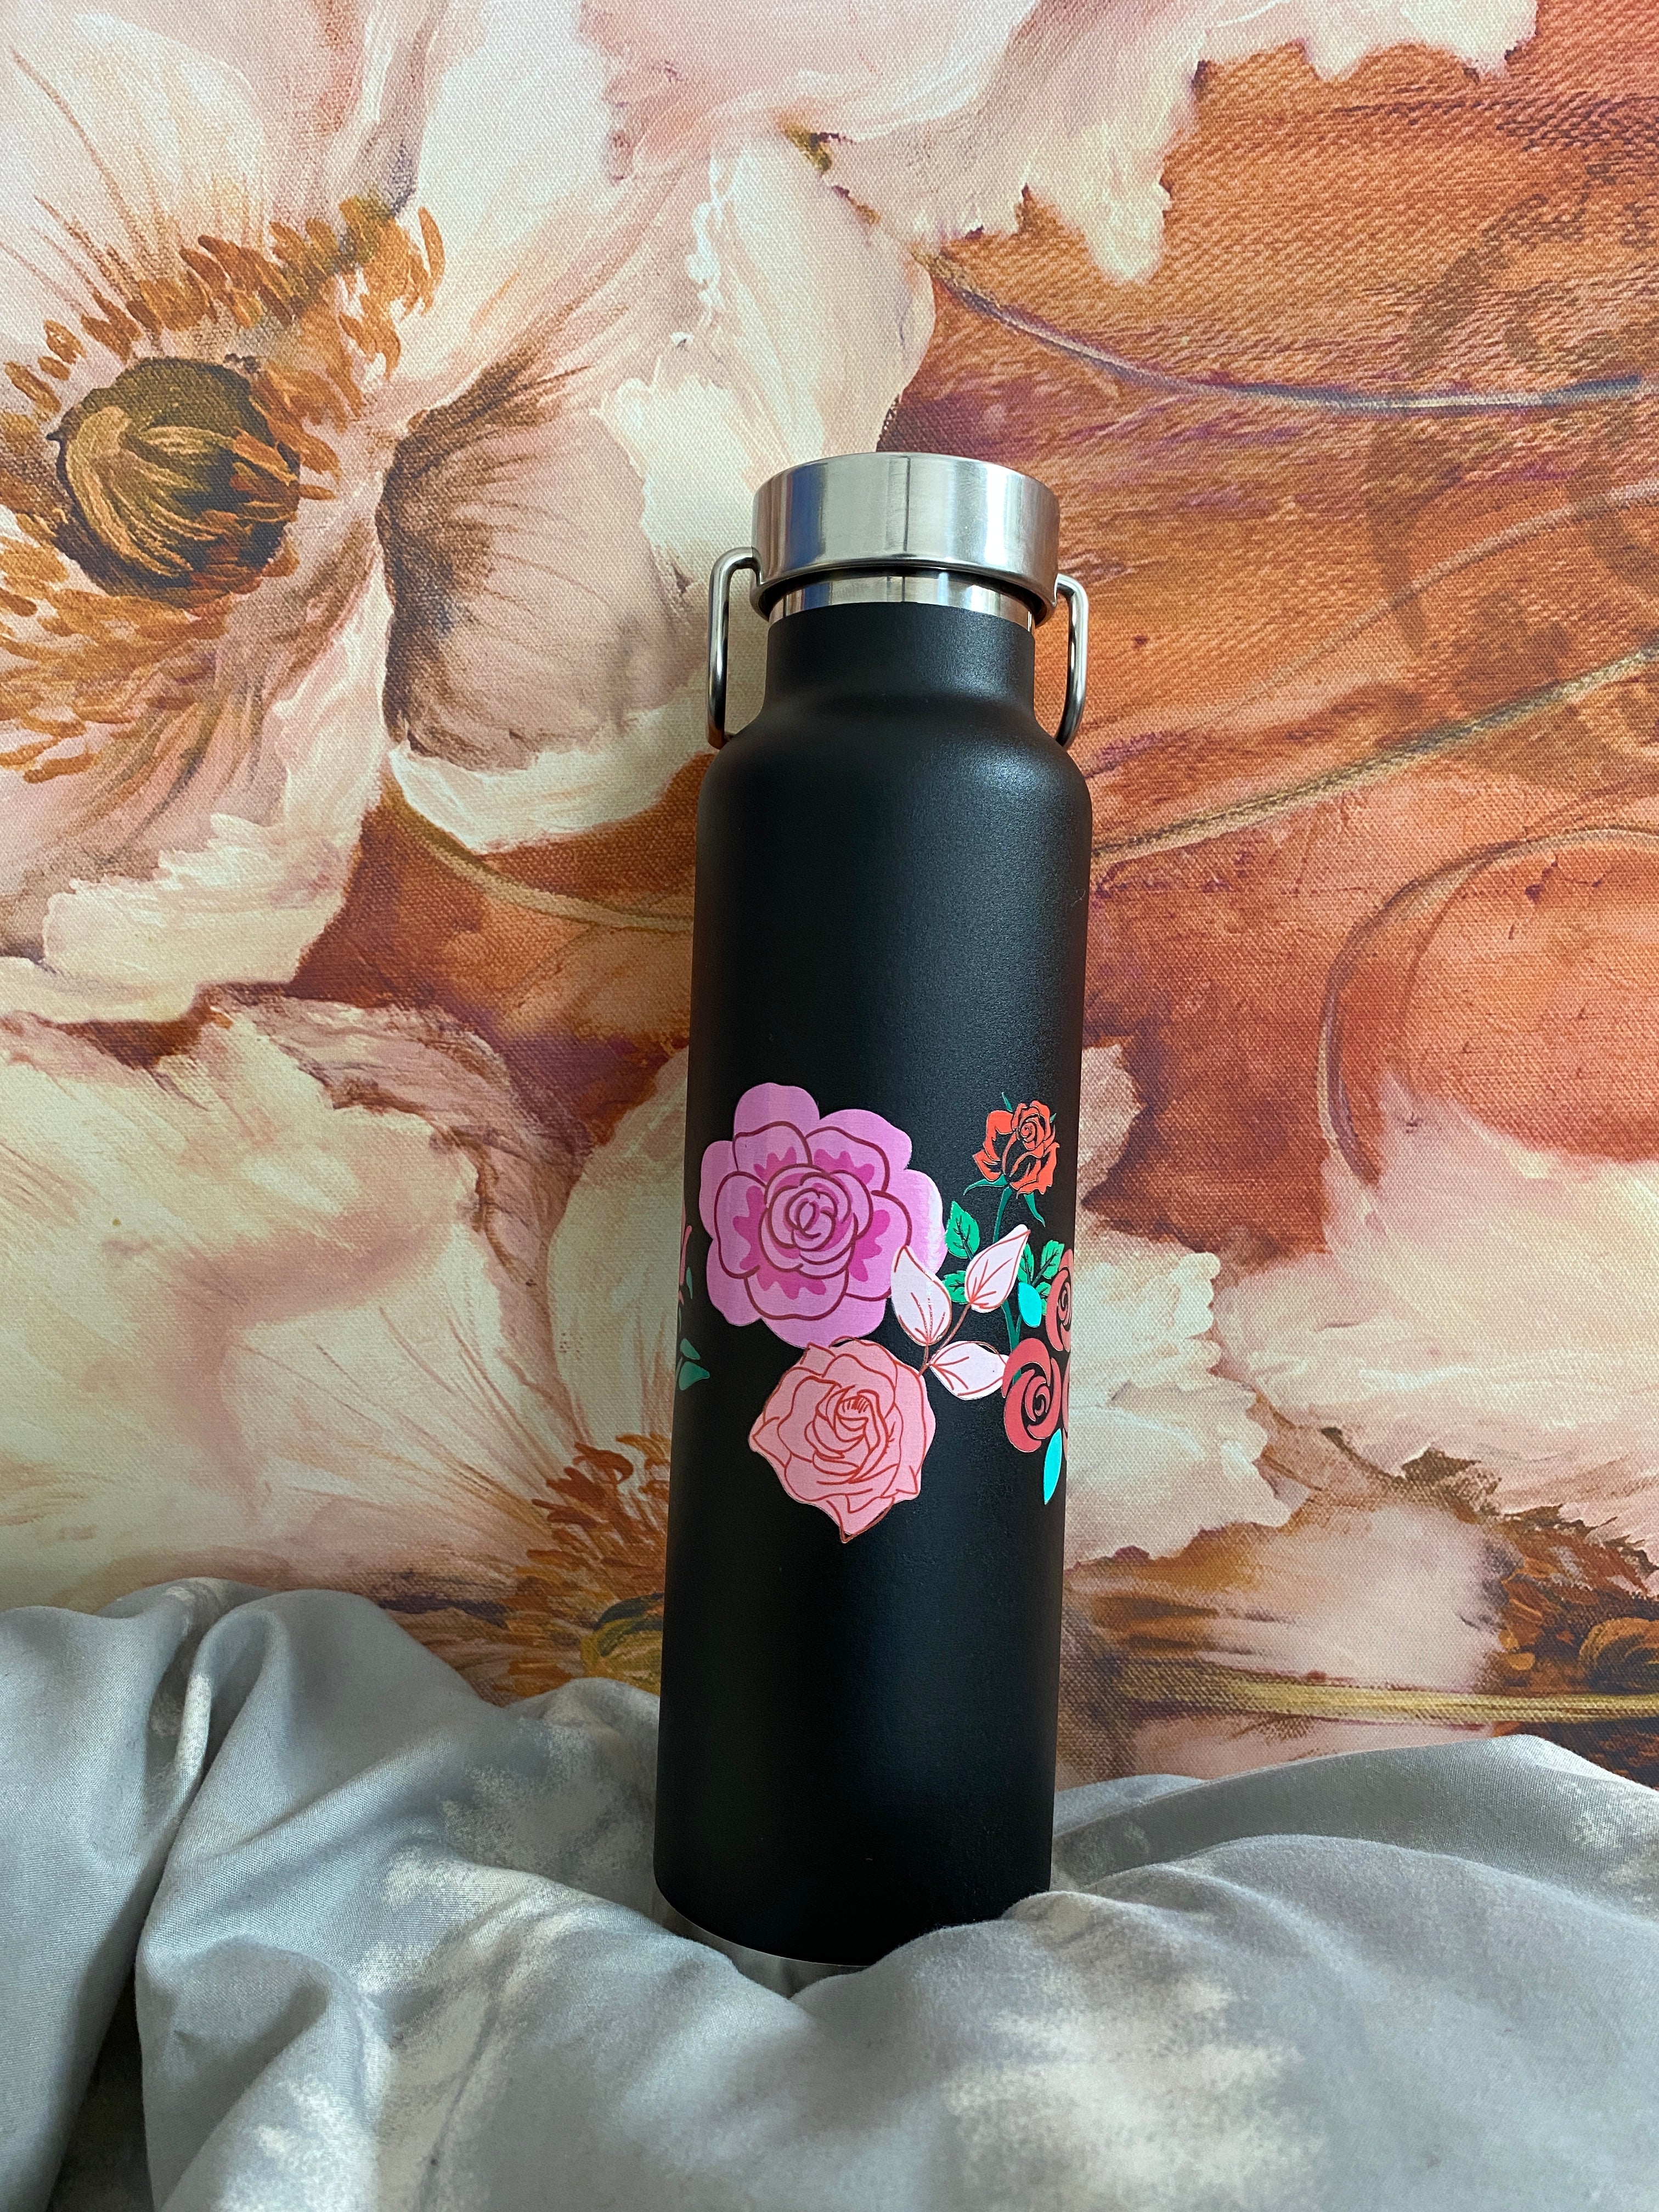 The 22oz copper vacuum insulated bottle in the black color with a flowers and rose design. It is positioned in front of artwork that also has flowers on it.